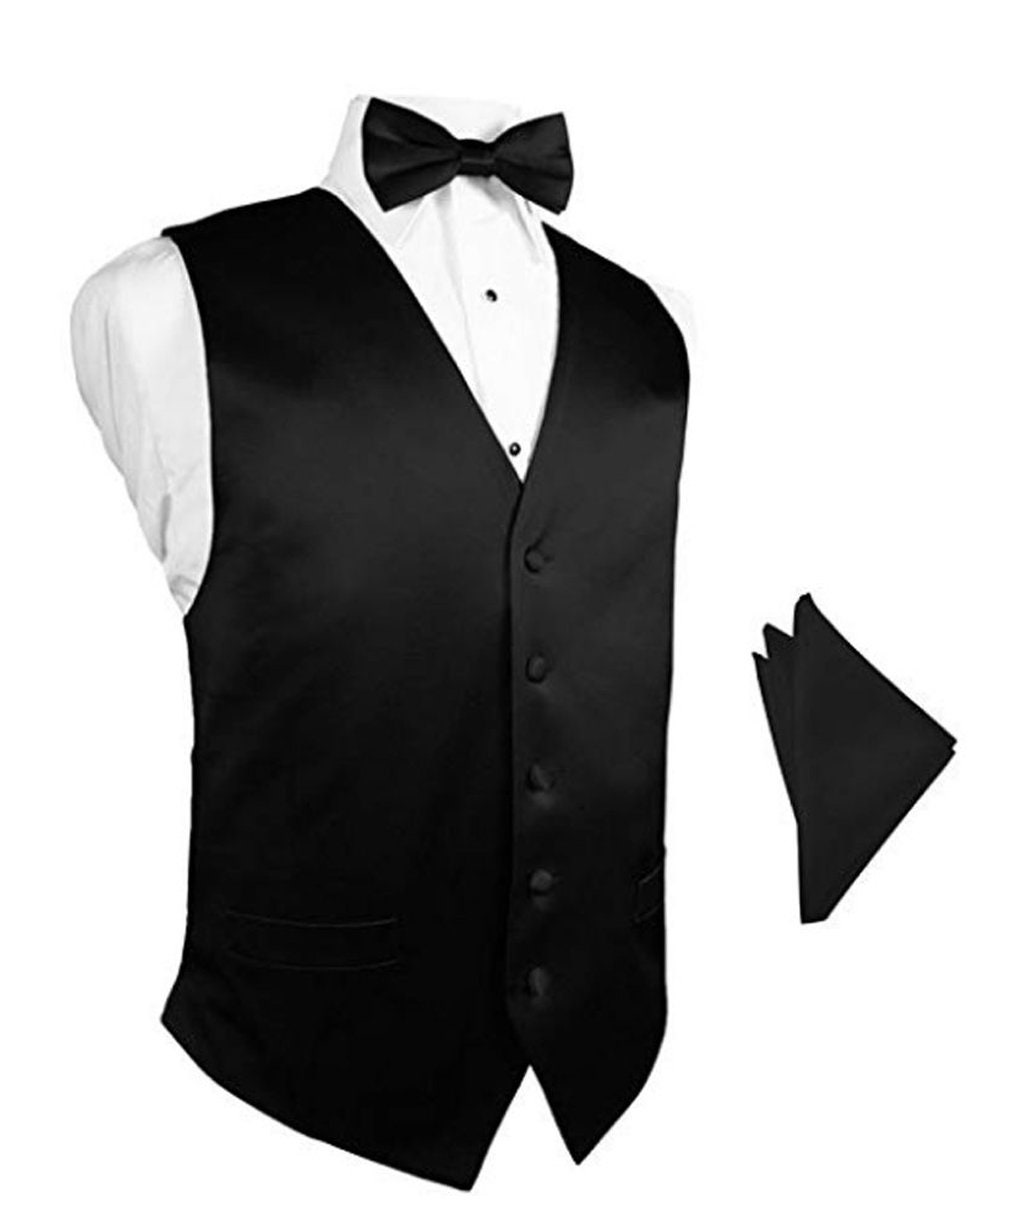 100% Silk Tuxedo Vest With Bow Tie & Pocket Square Set in - Etsy